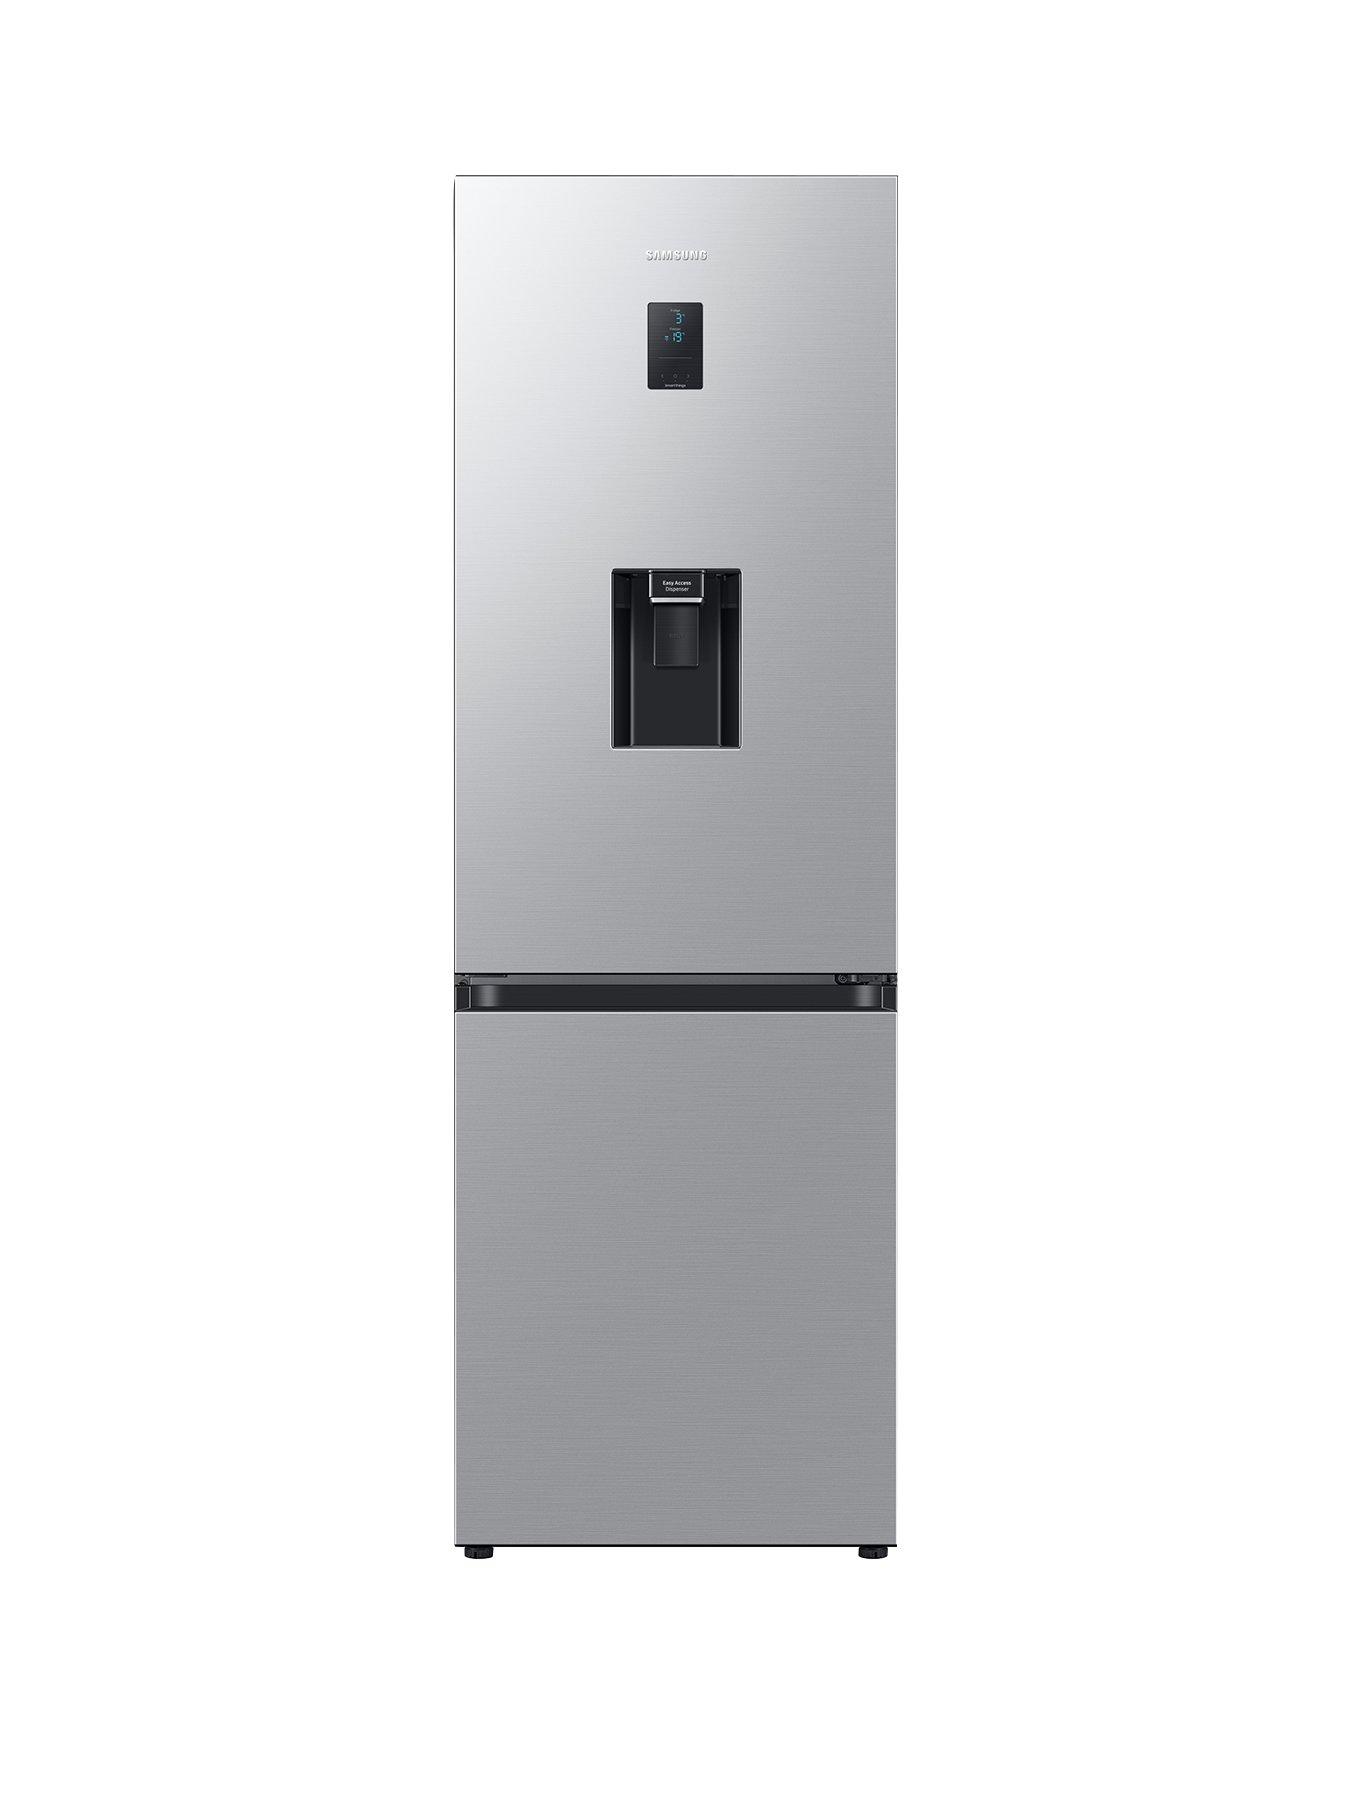 Samsung Rb7300T Rb34C652Esa/Eu 4 Series Frost-Free Classic Fridge Freezer With Non-Plumbed Water Dispenser - E Rated - Silver